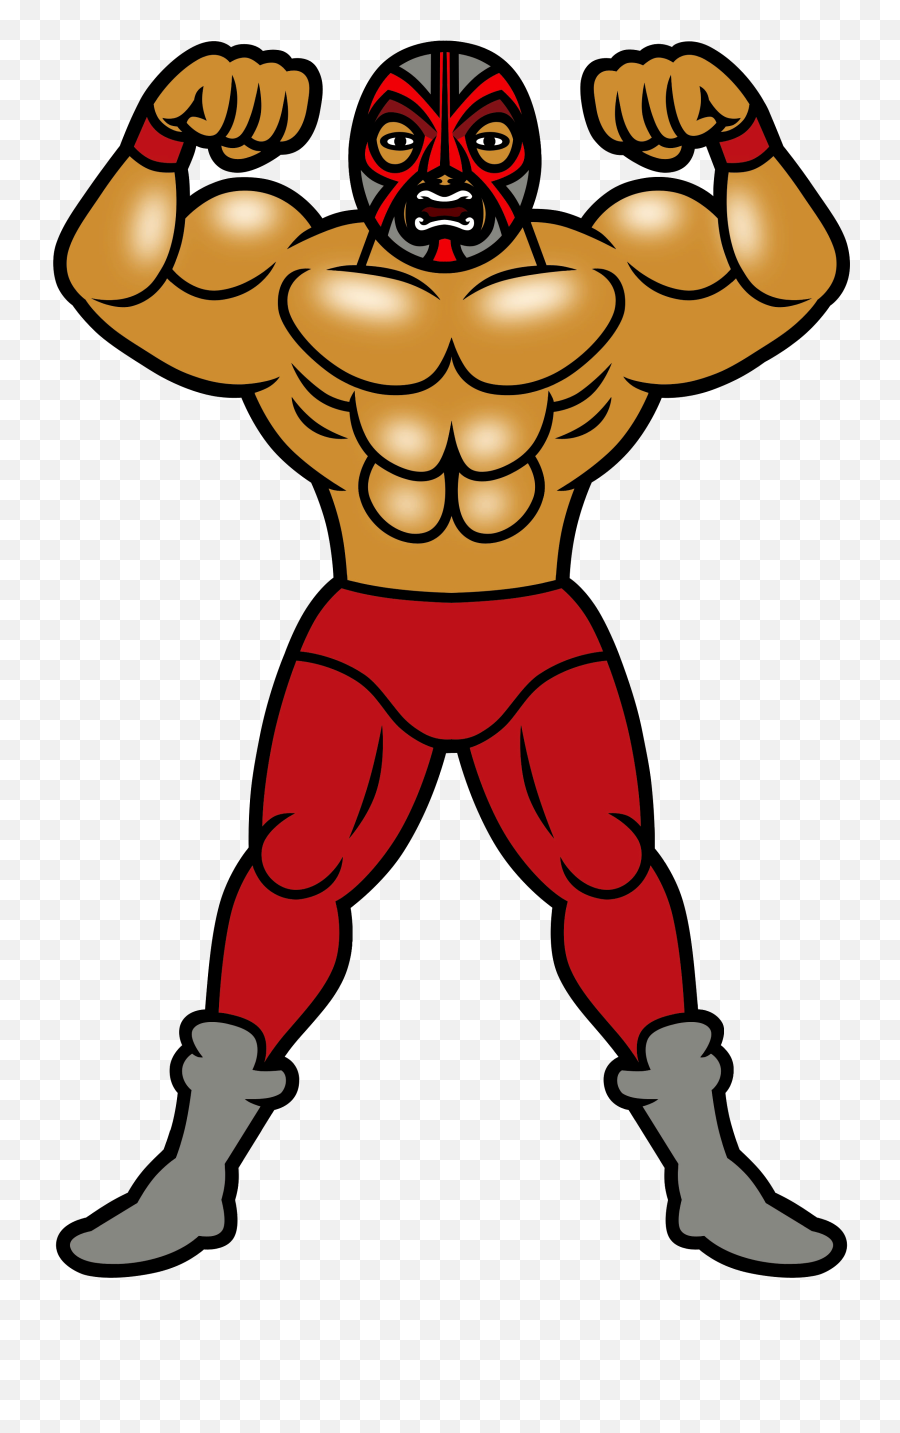 Download Hd He - Reporter And Wrestler Rhythm Heaven Png,Wrestler Png